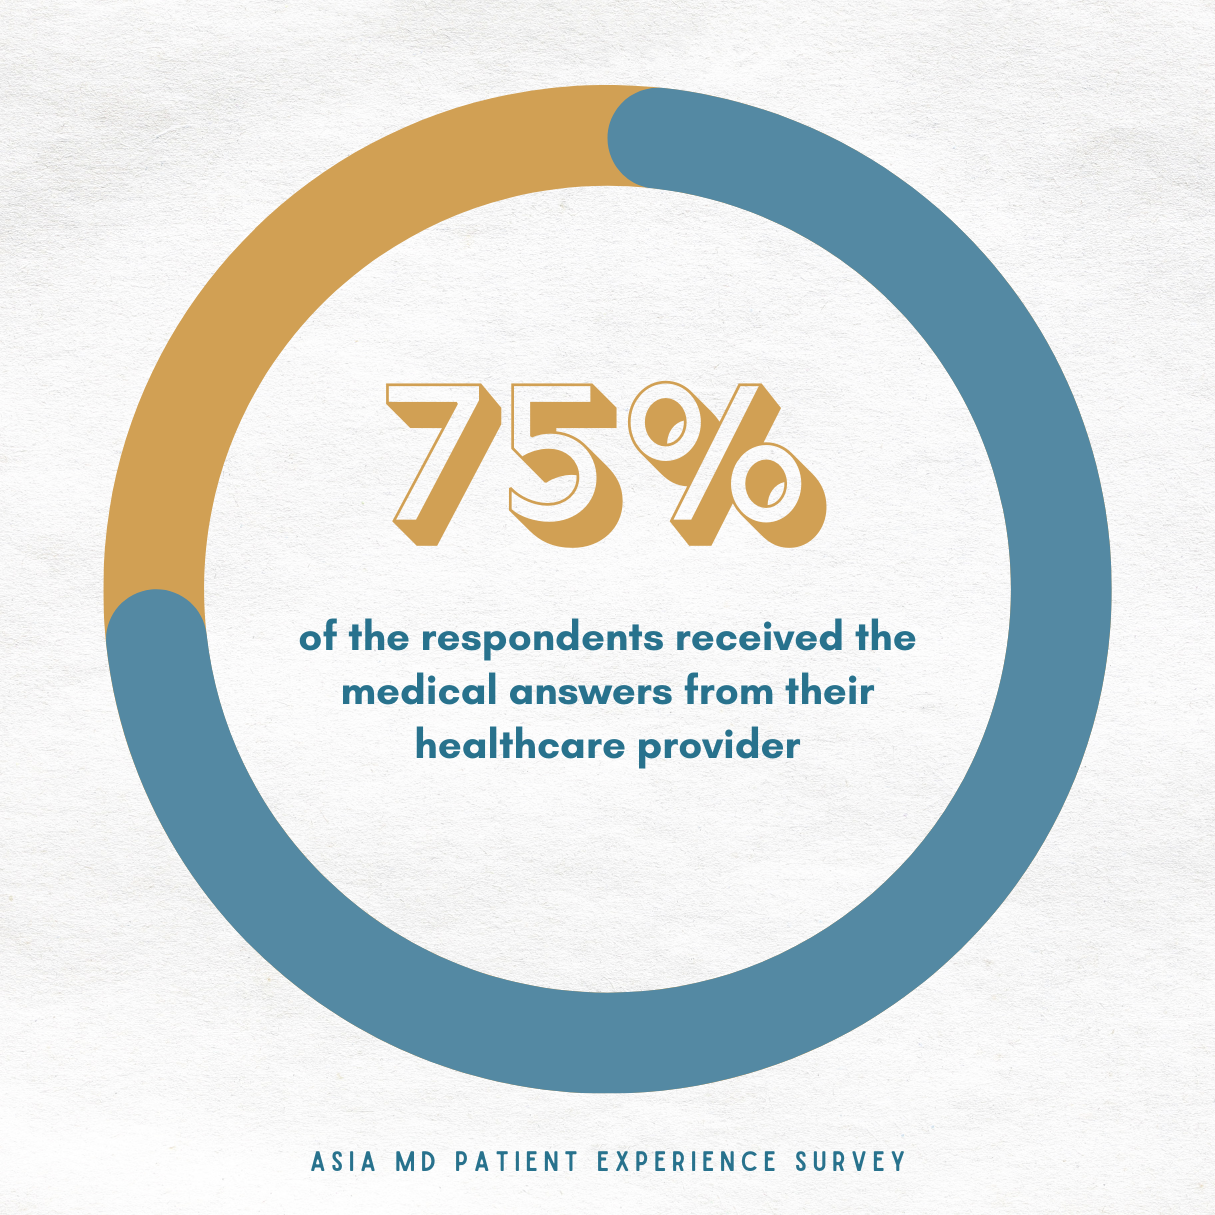 Healthcare Service Quality_75% of the respondents received the medical answers from their healthcare provider